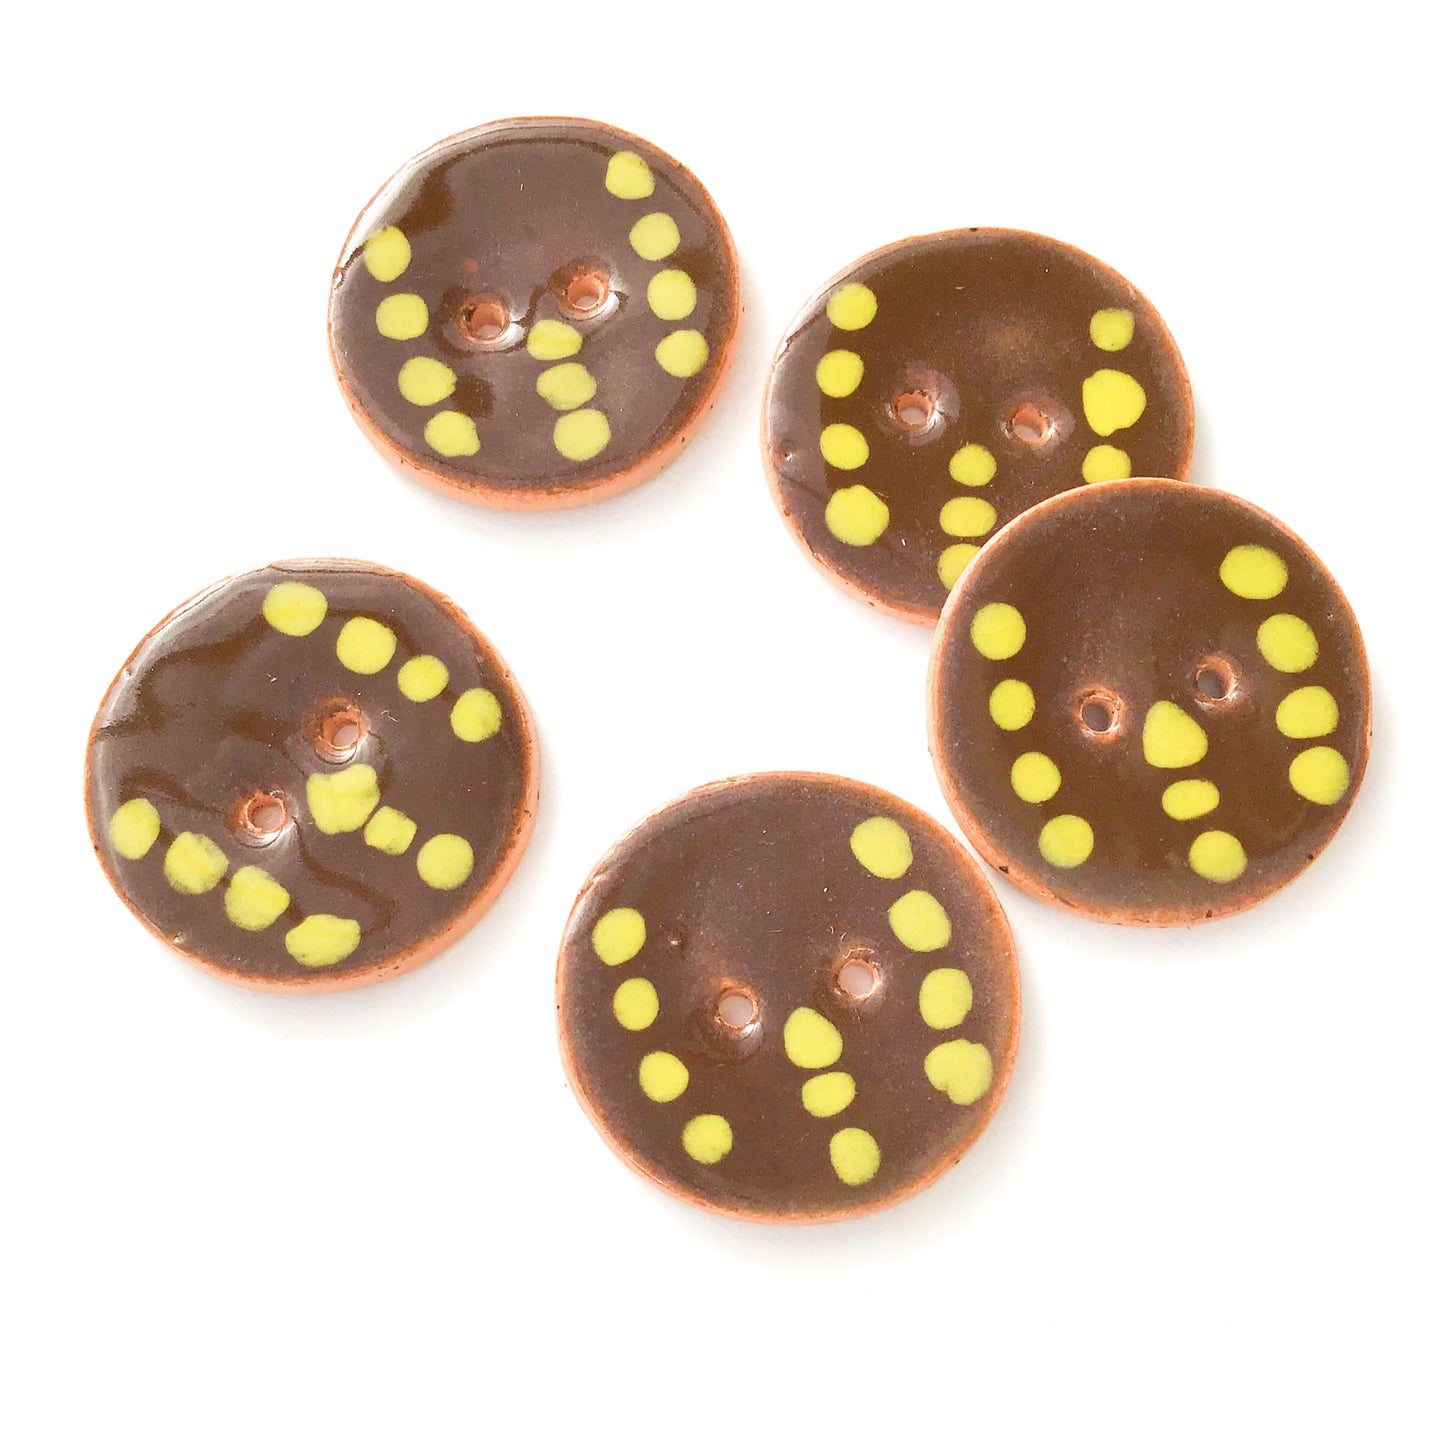 Brown & Chartreuse Dotted Ceramic Buttons 1-1/16" - 5 Pack